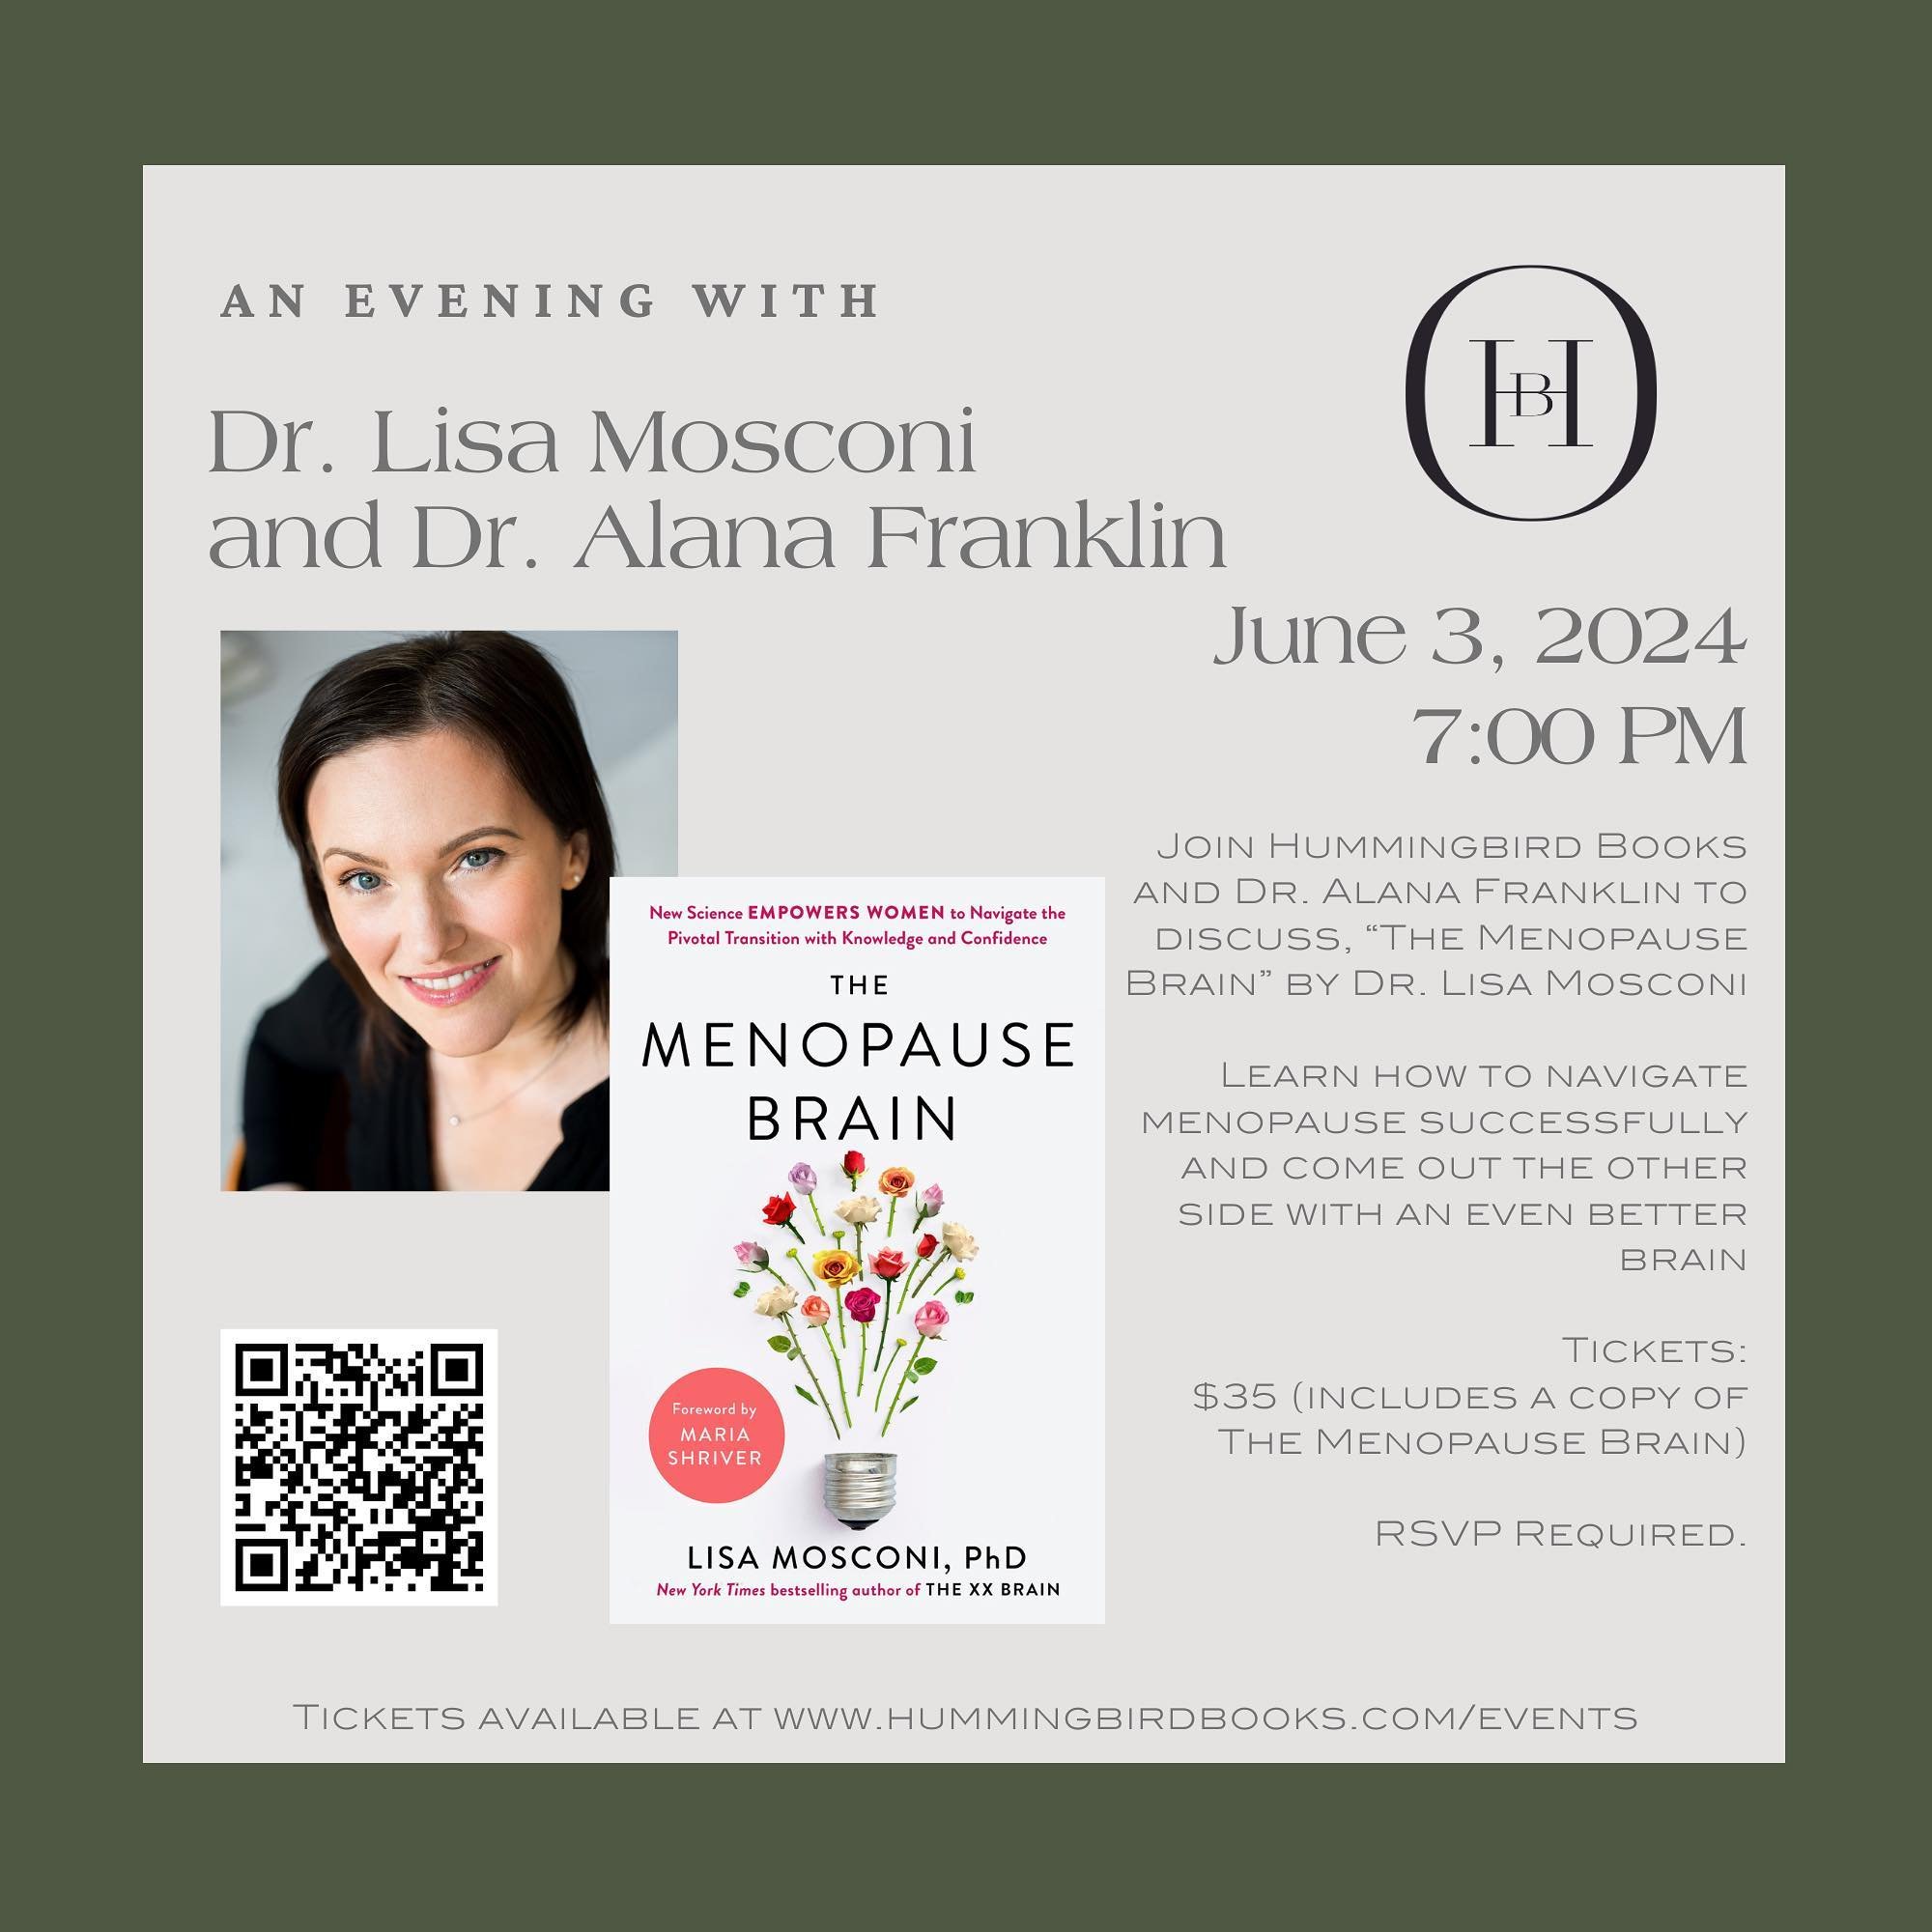 We&rsquo;re so excited to welcome @dr_mosconi to discuss her new book, &ldquo;The Menopause Brain.&rdquo; Moderated by Dr. Alana Franklin, member of The North American Menopause Society, learn how to navigate menopause successfully and come out the o